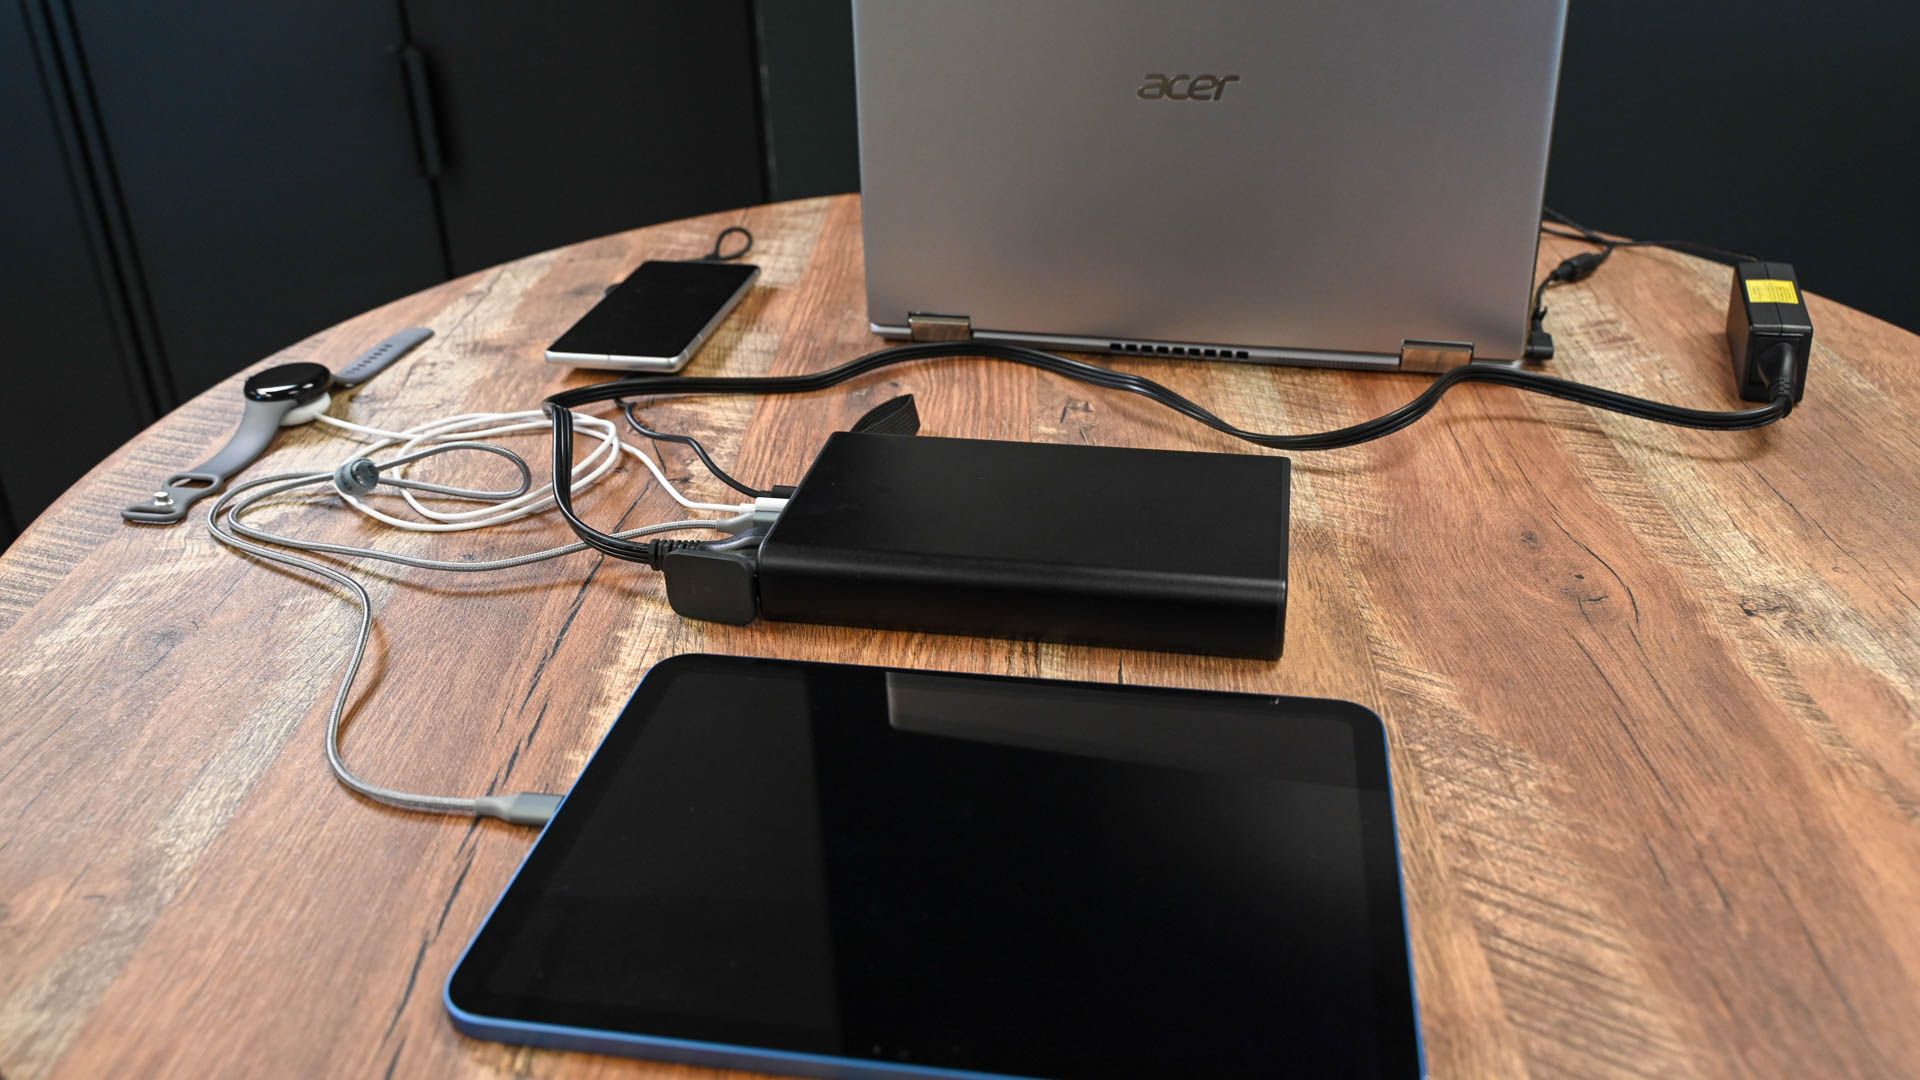 Laptop, smart watch, smartphone, and tablet charging with the Mophie Powerstation Pro AC.